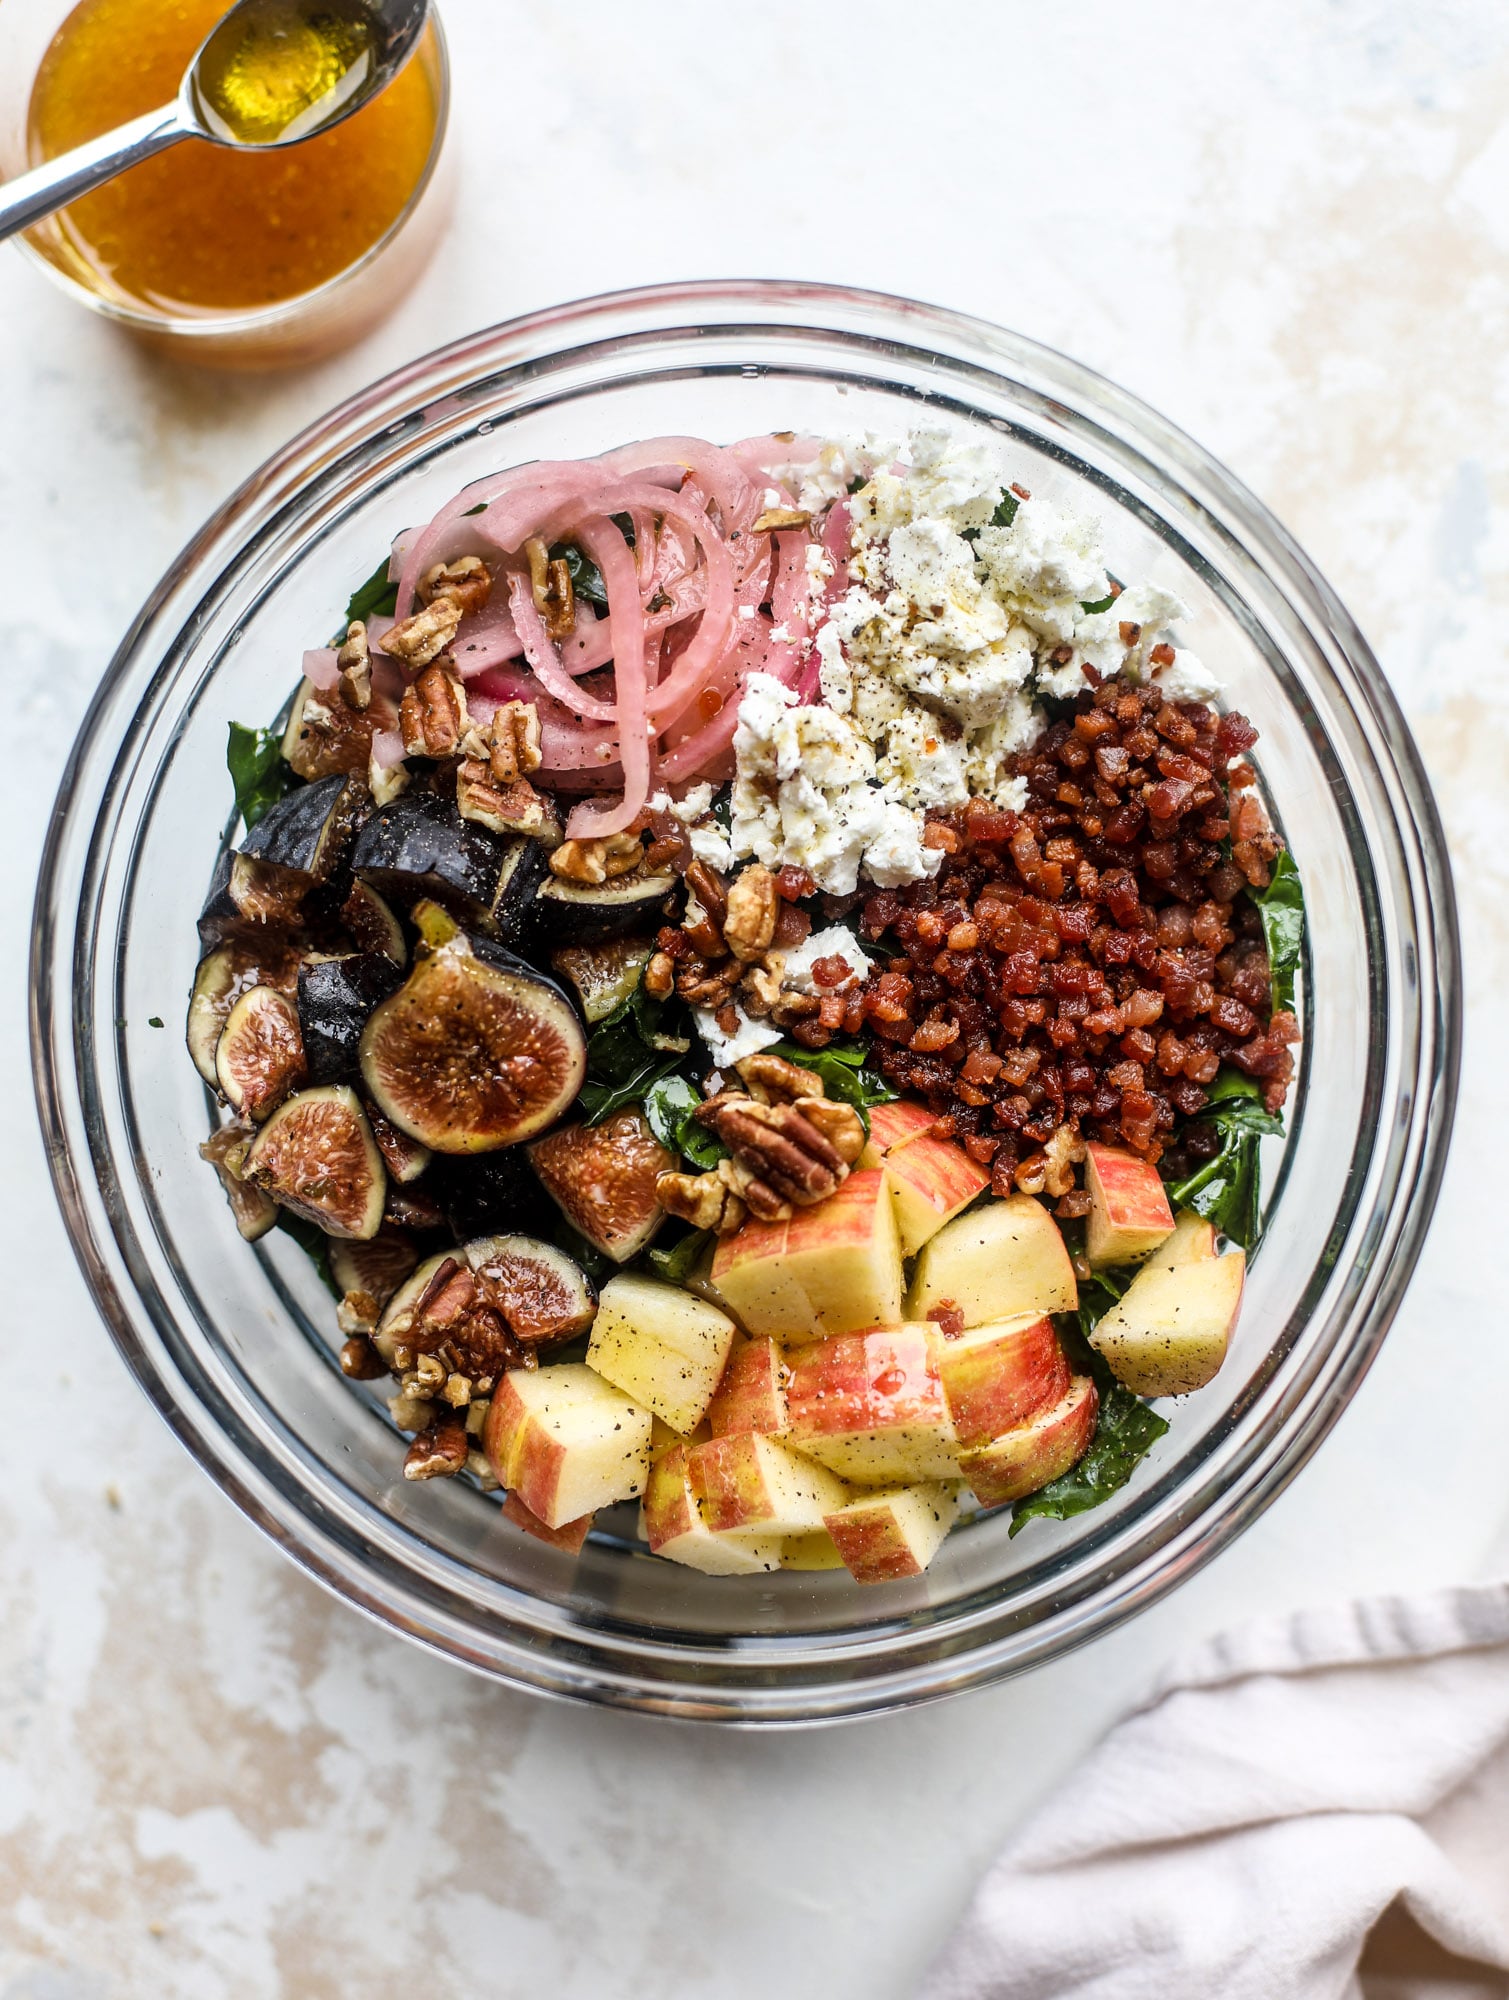 This fall kale salad is perfect for the season and full of so much delicious flavor! Shredded kale, honeycrisp apple, fresh figs, pancetta, pickled onions, pecans and goat cheese come together with a maple cider vinaigrette for salad heaven. I howsweeteats.com #fall #kale #salad #apples #figs #pecans